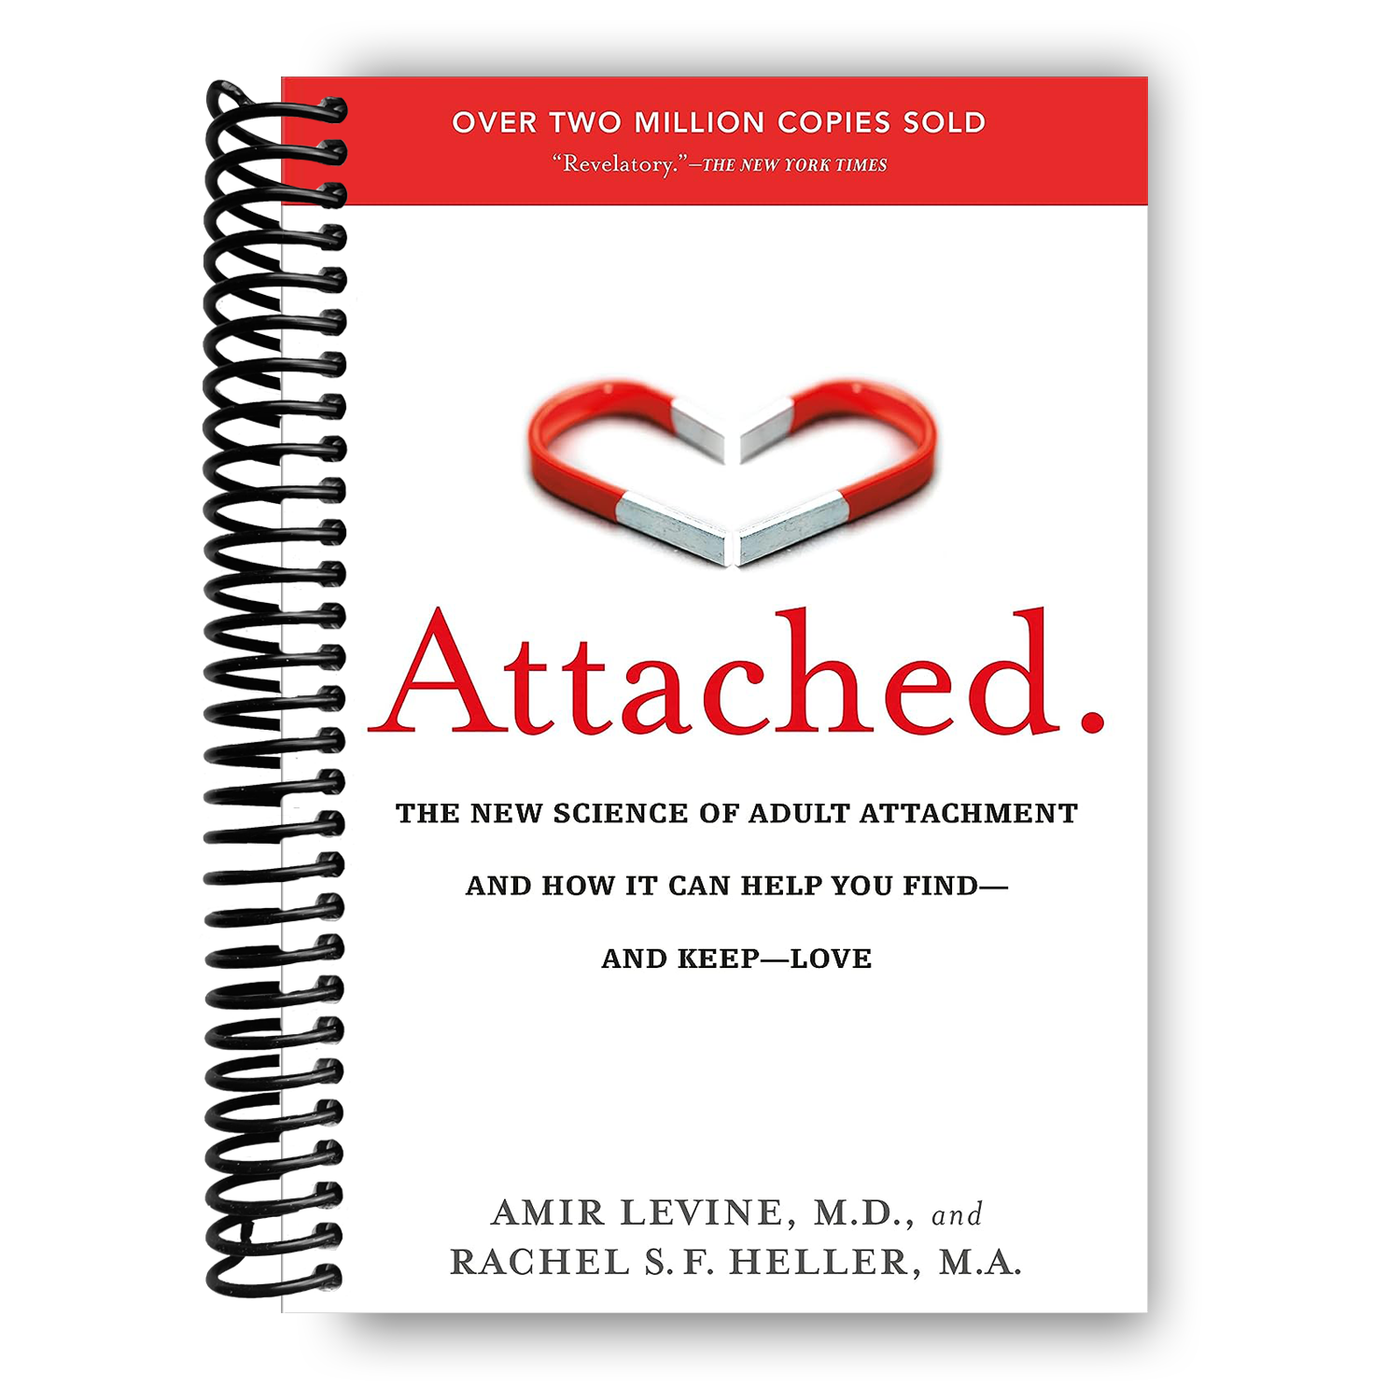 Attached: The New Science of Adult Attachment and How It Can Help YouFind - and Keep - Love (Spiral bound)